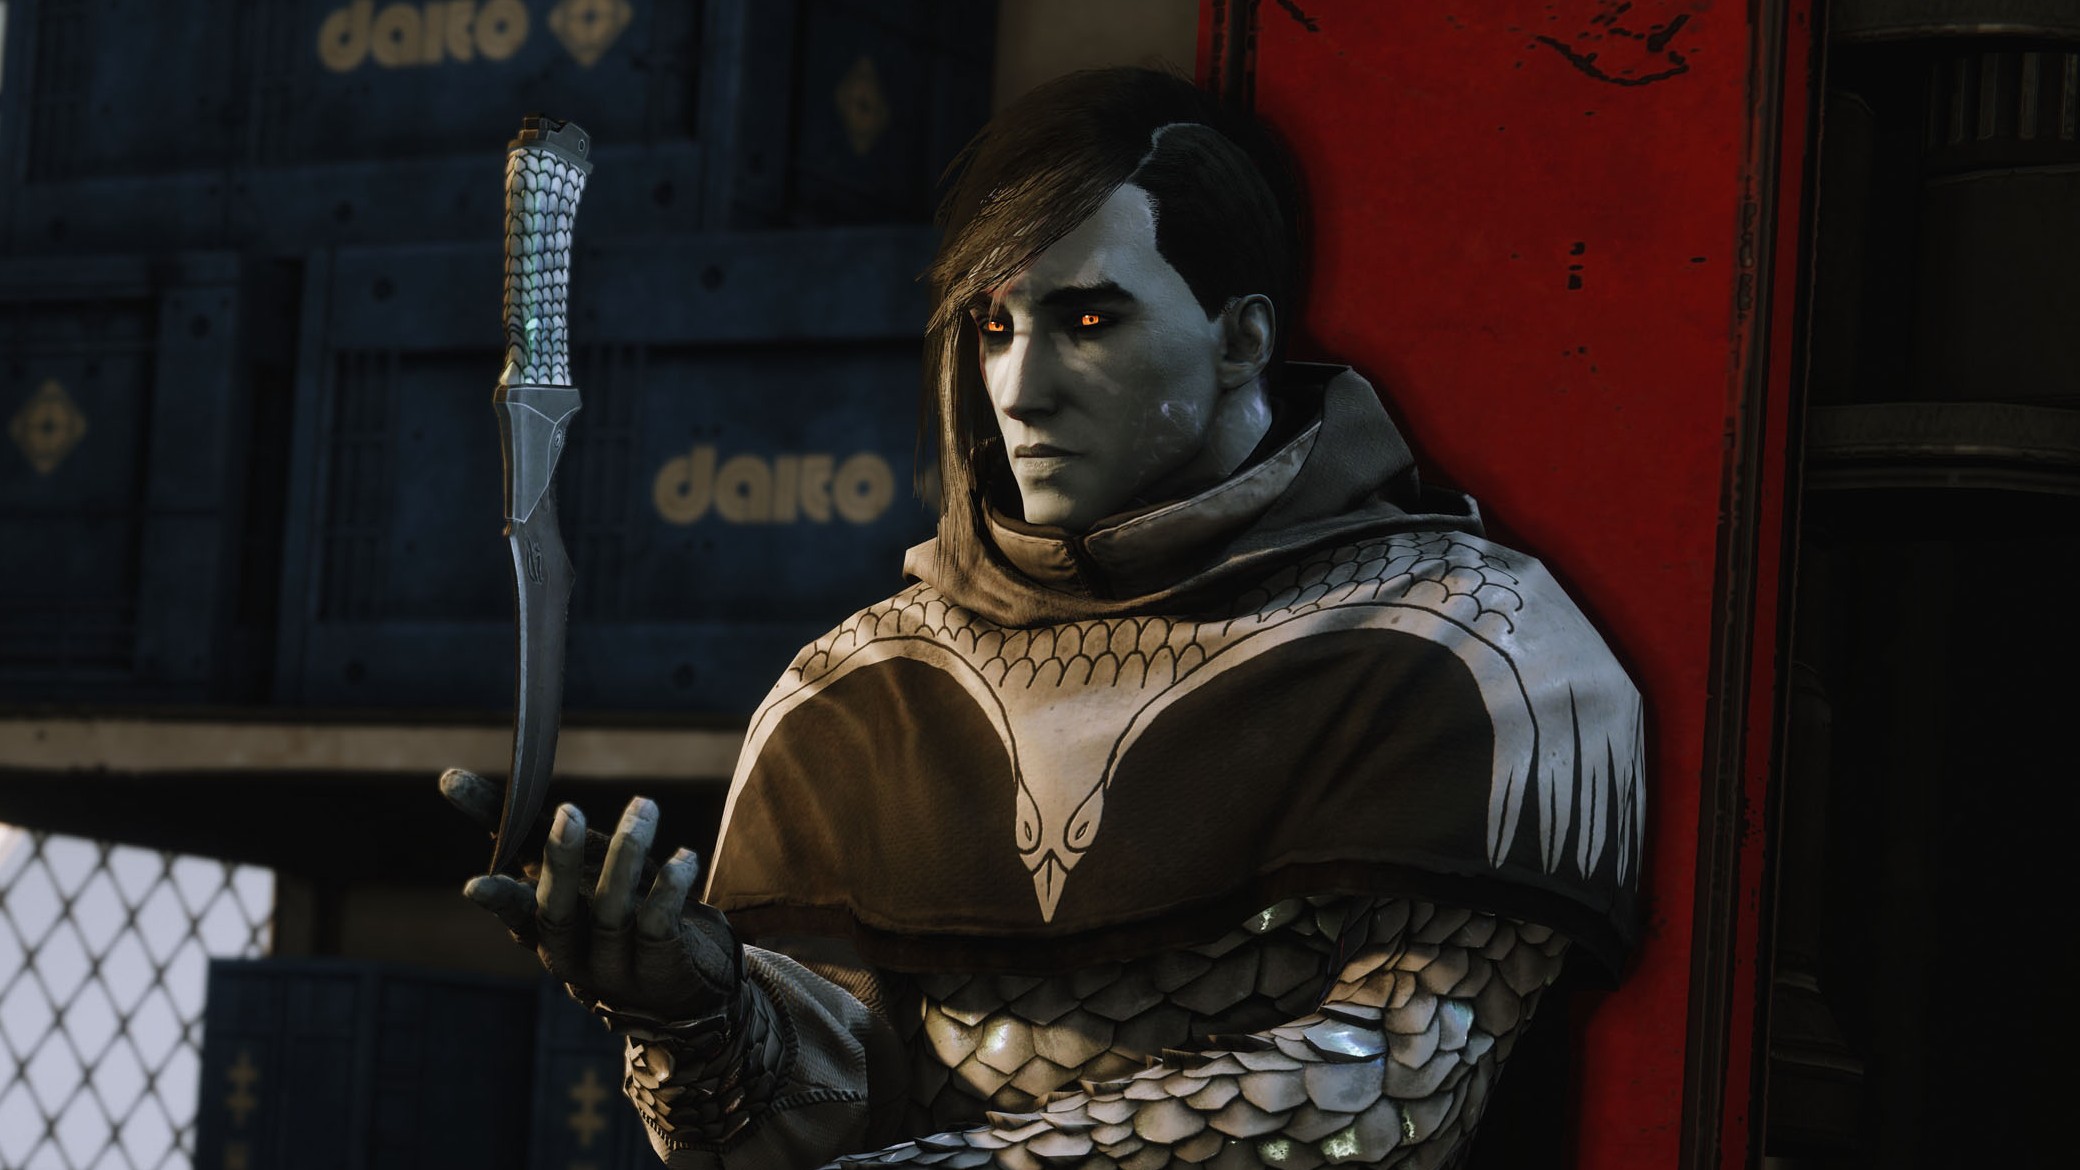 Crow/Uldren Sov in Destiny 2, playing with a knife.